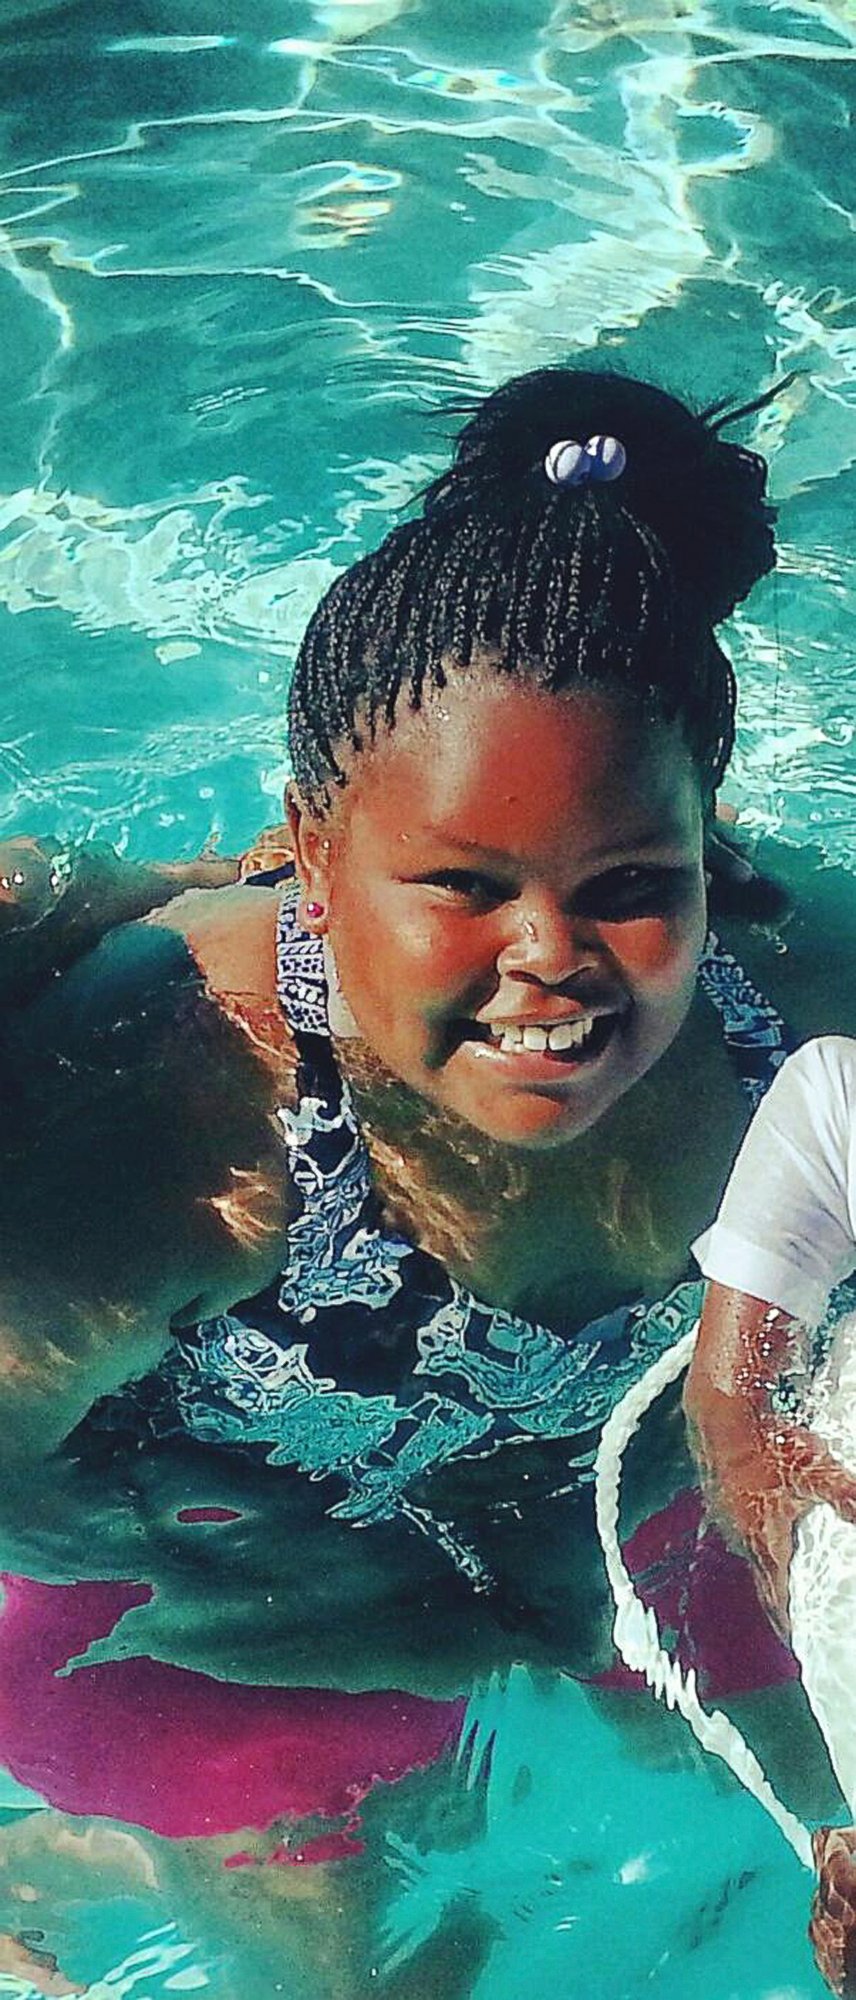 PHOTO: Jahi McMath remains on life support at Children's Hospital Oakland nearly a week after doctors declared her brain dead.